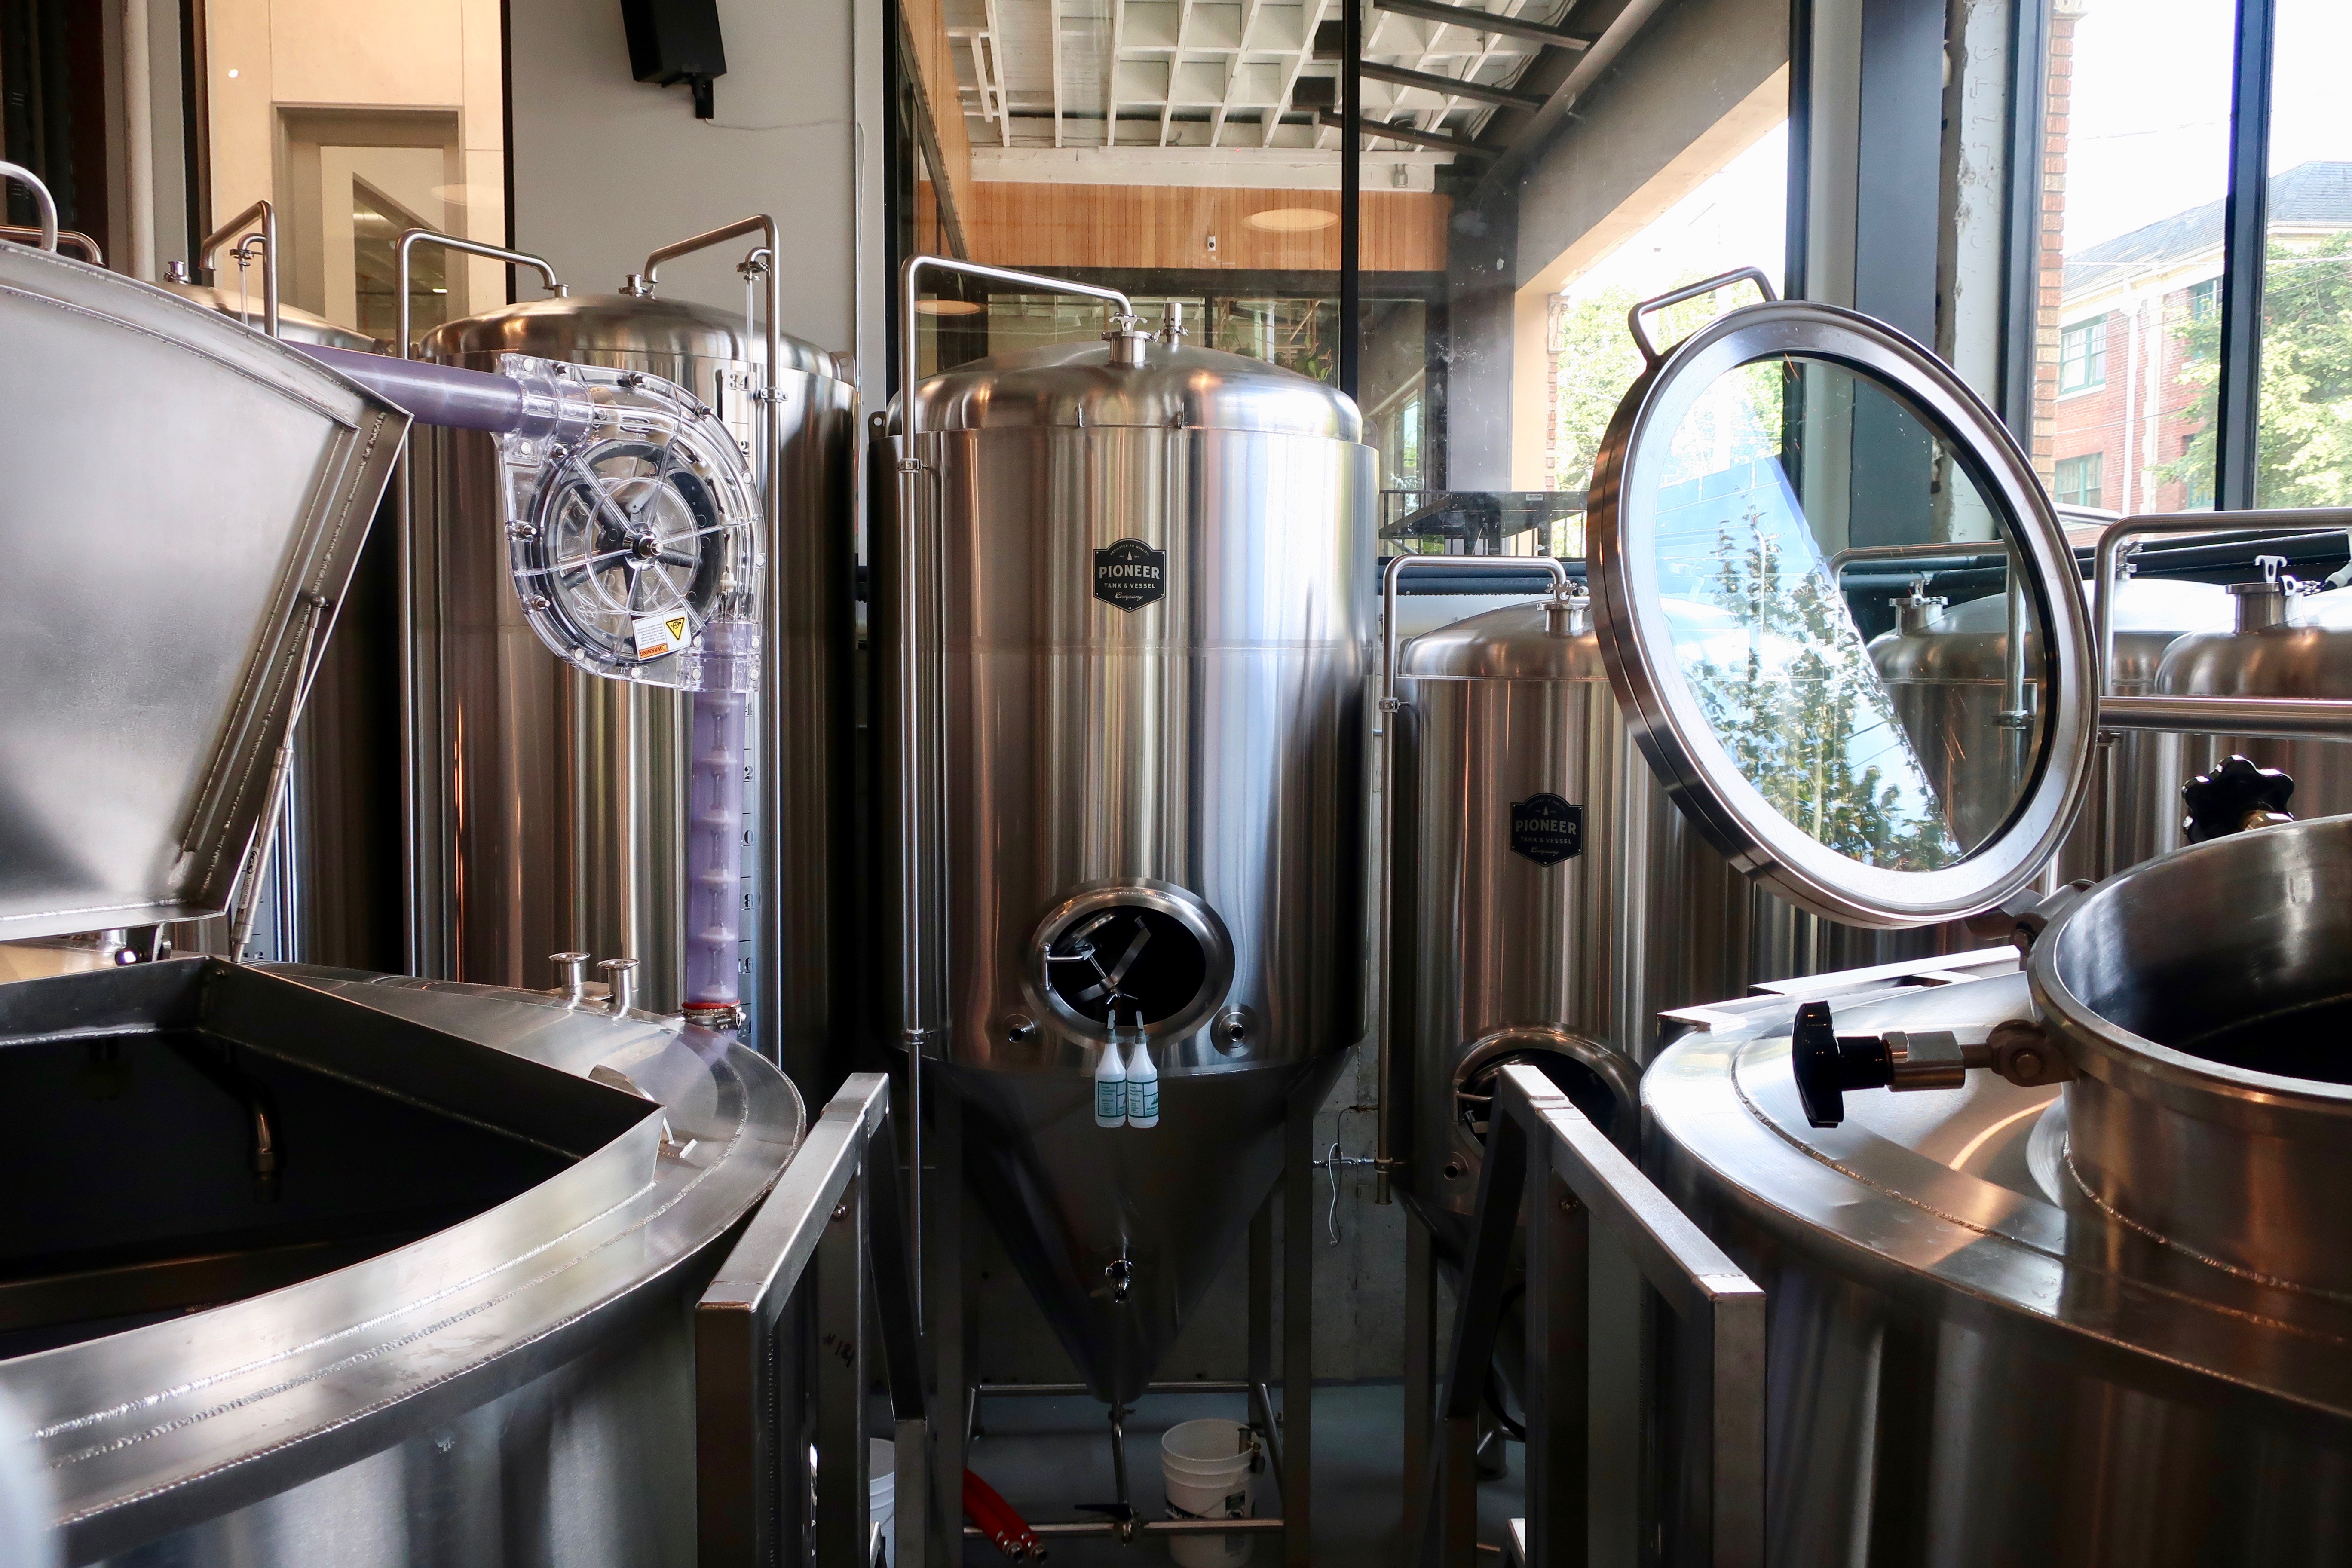 Peeking into the 15-barrel brewhouse from the dinning area at West Coast Grocery Co..